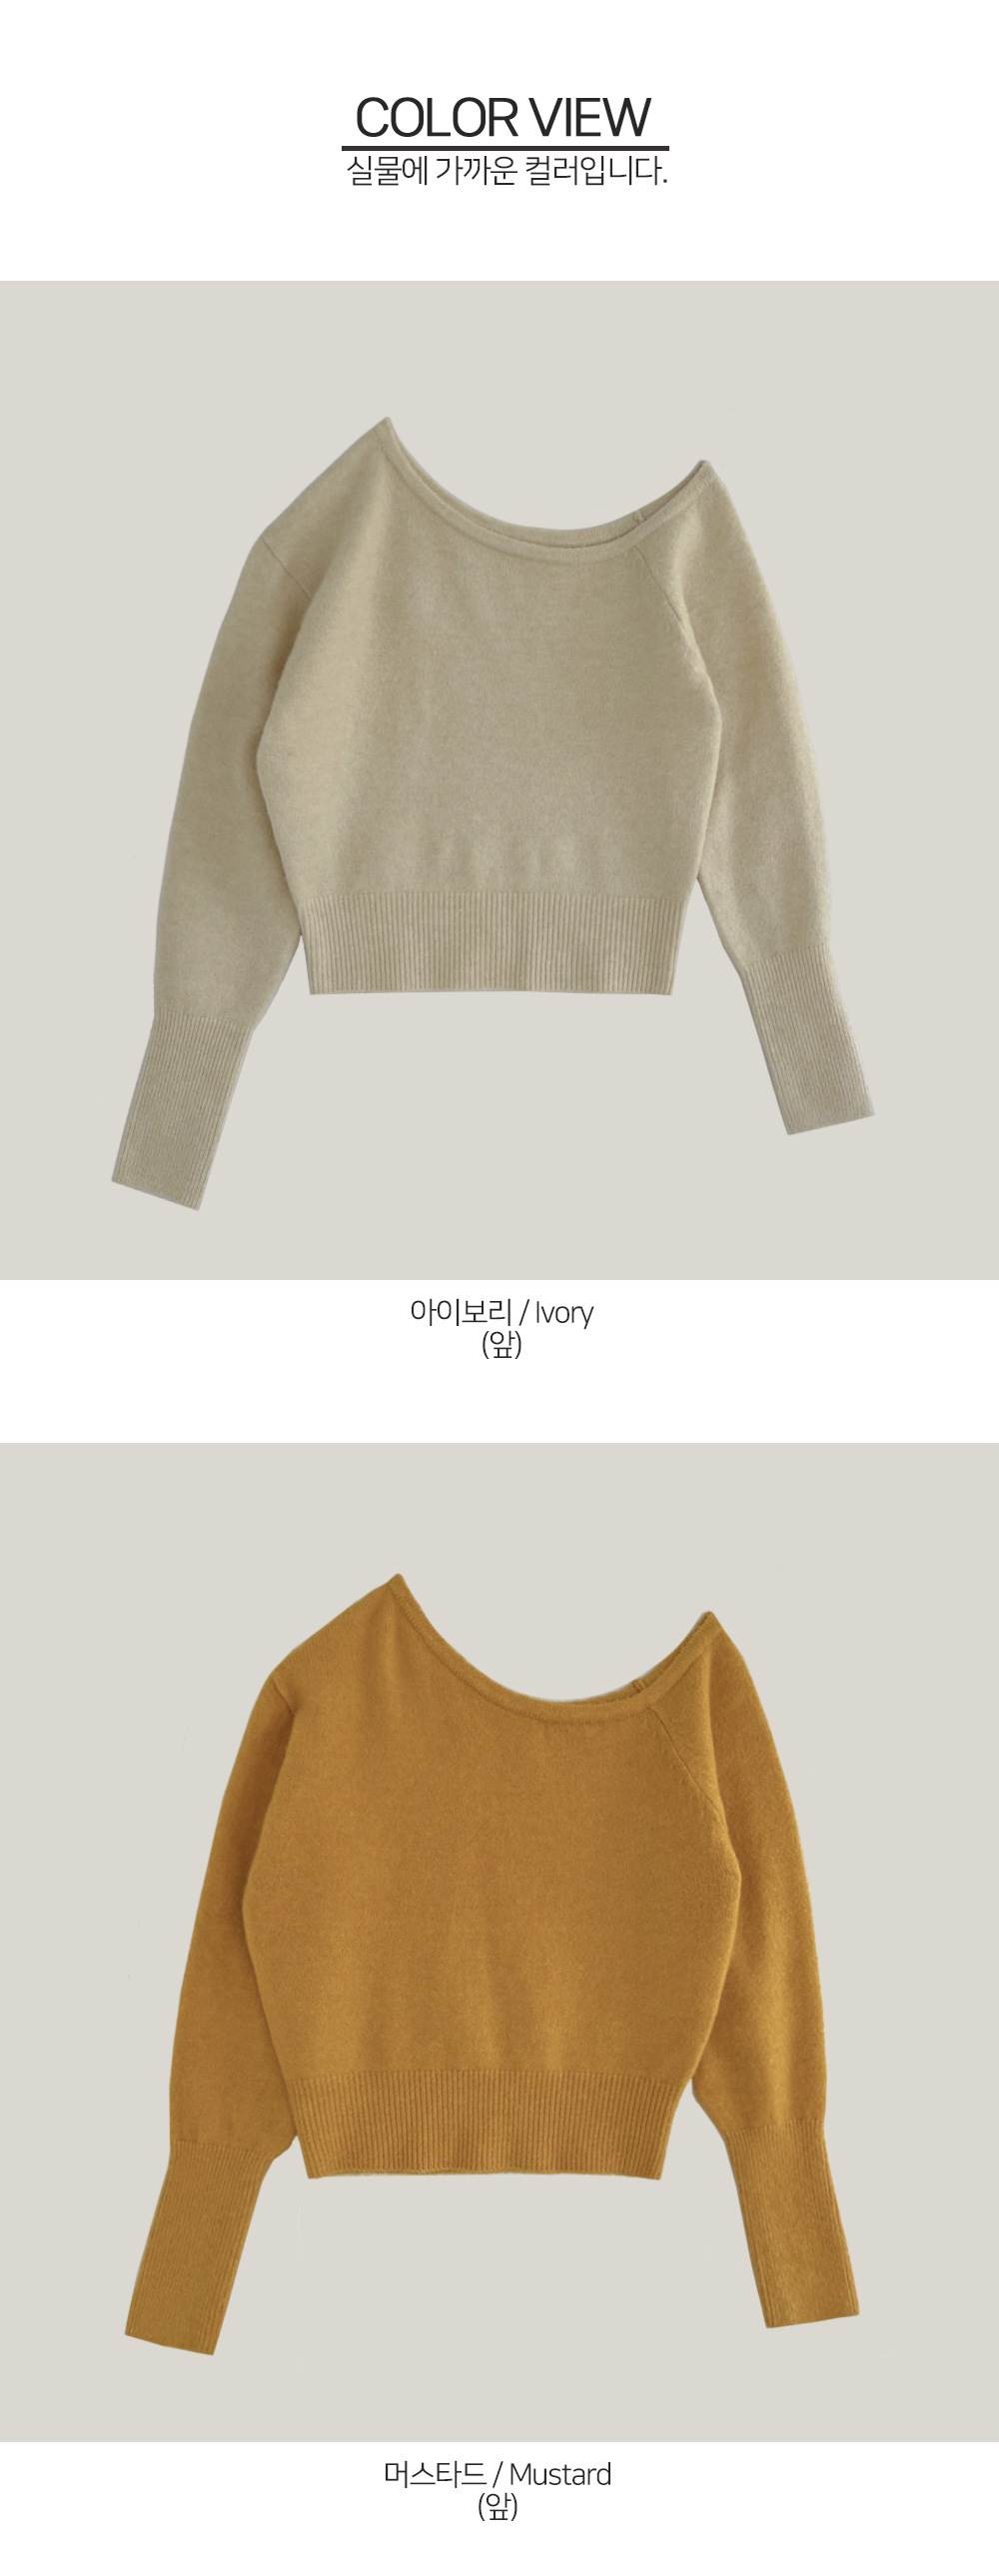 long sleeved tee cream color image-S1L15